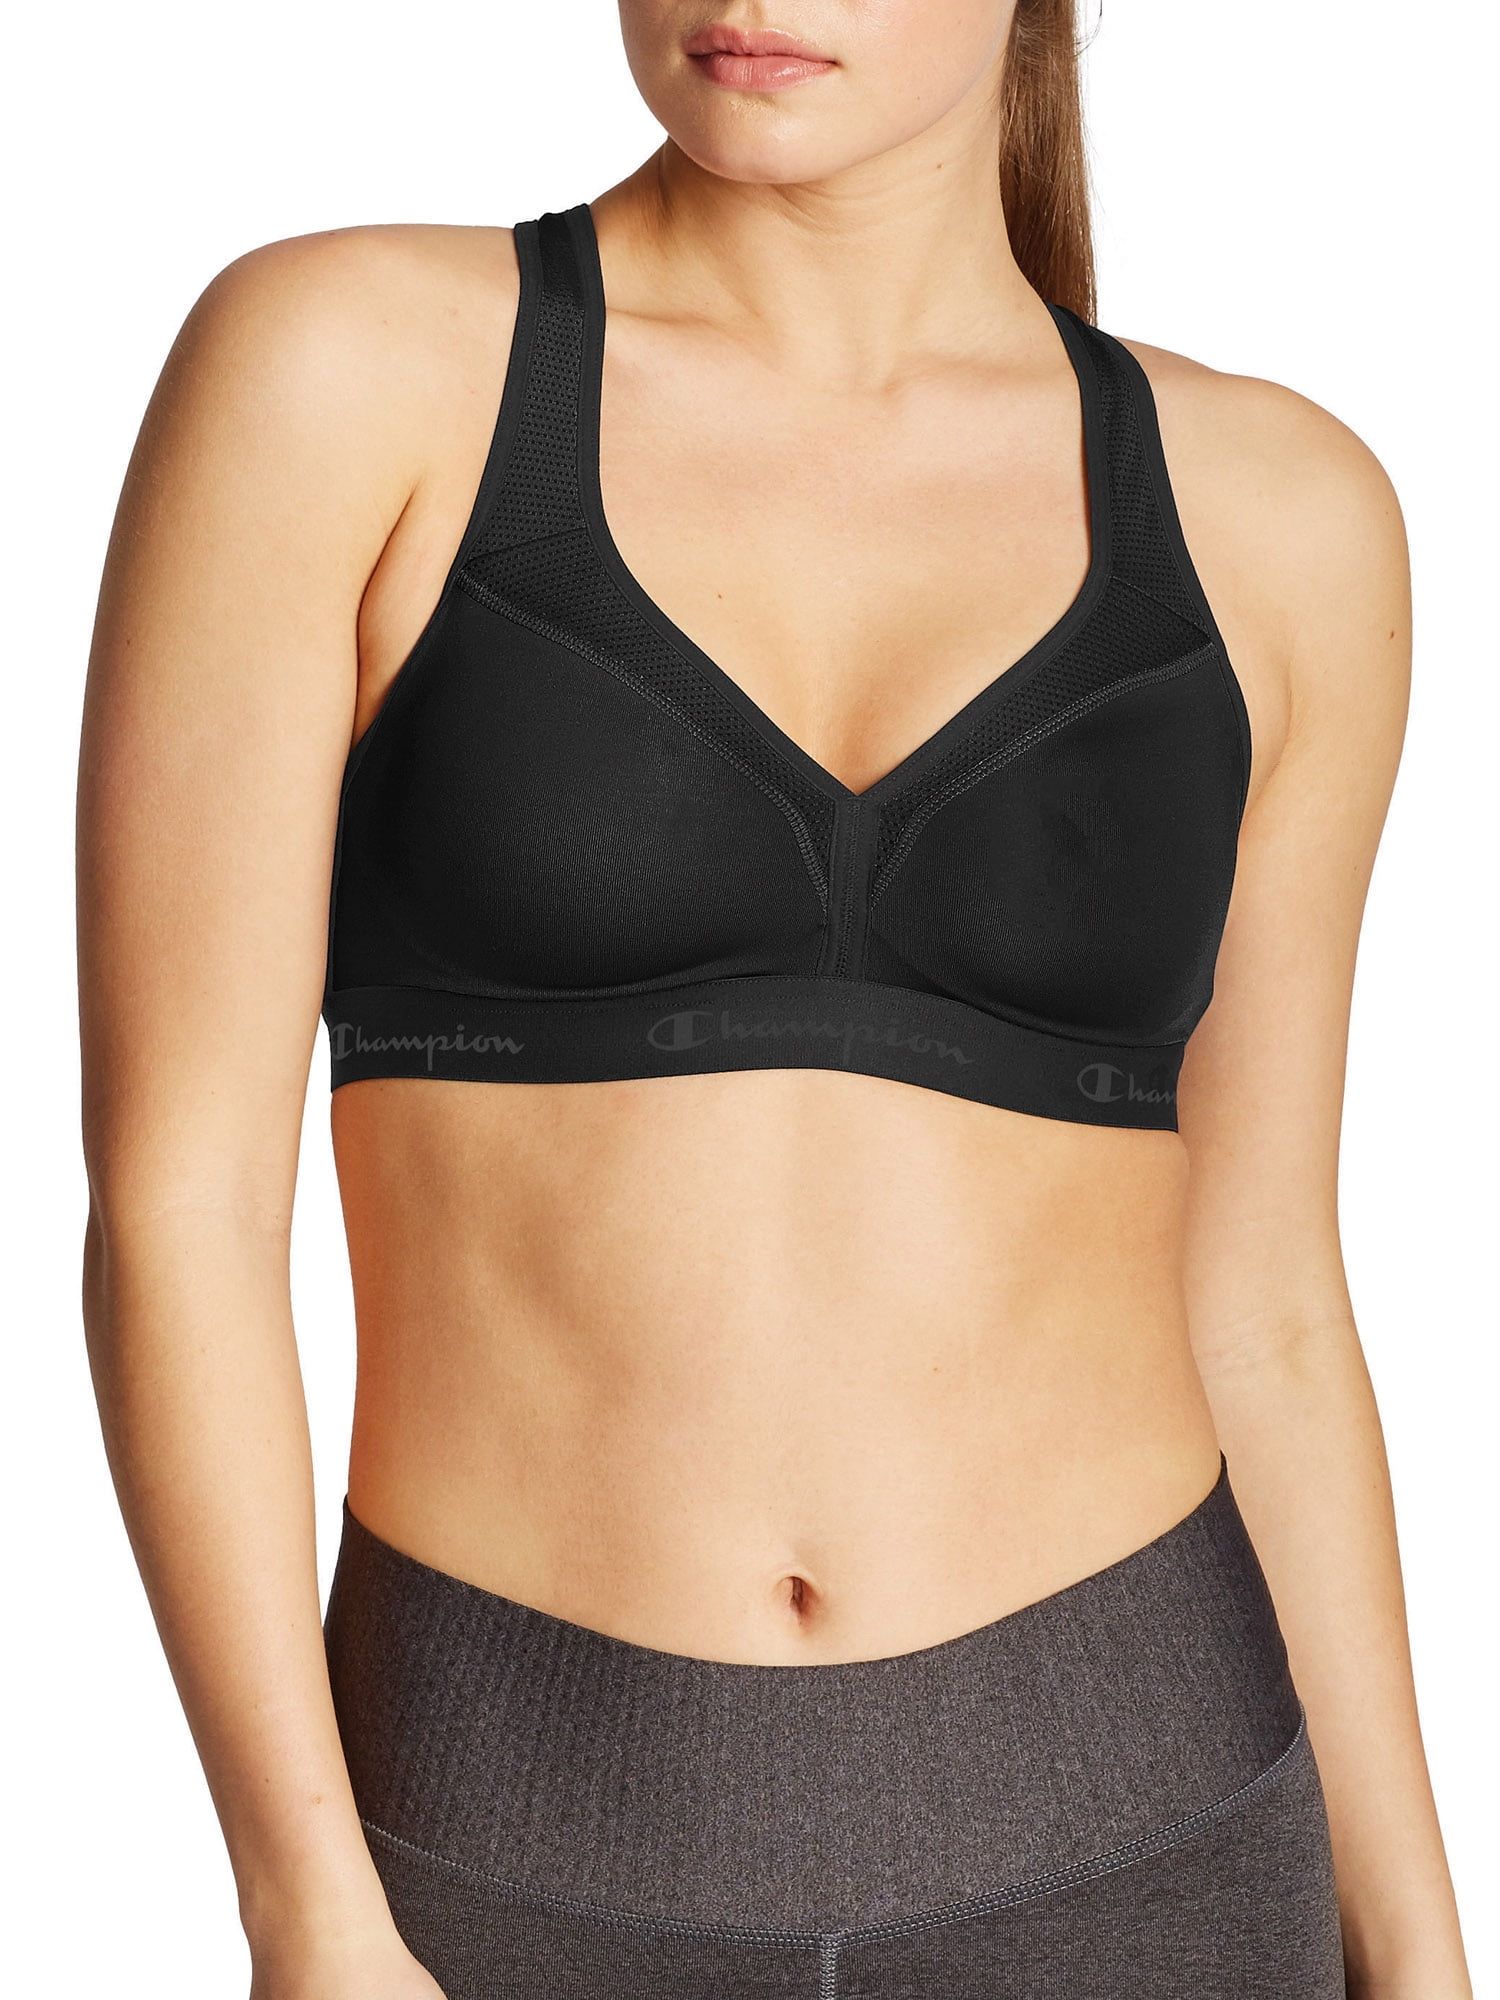 Champion Med Support Sports Bra Black Size Medium Curvy Show off Style B9373 for sale online 